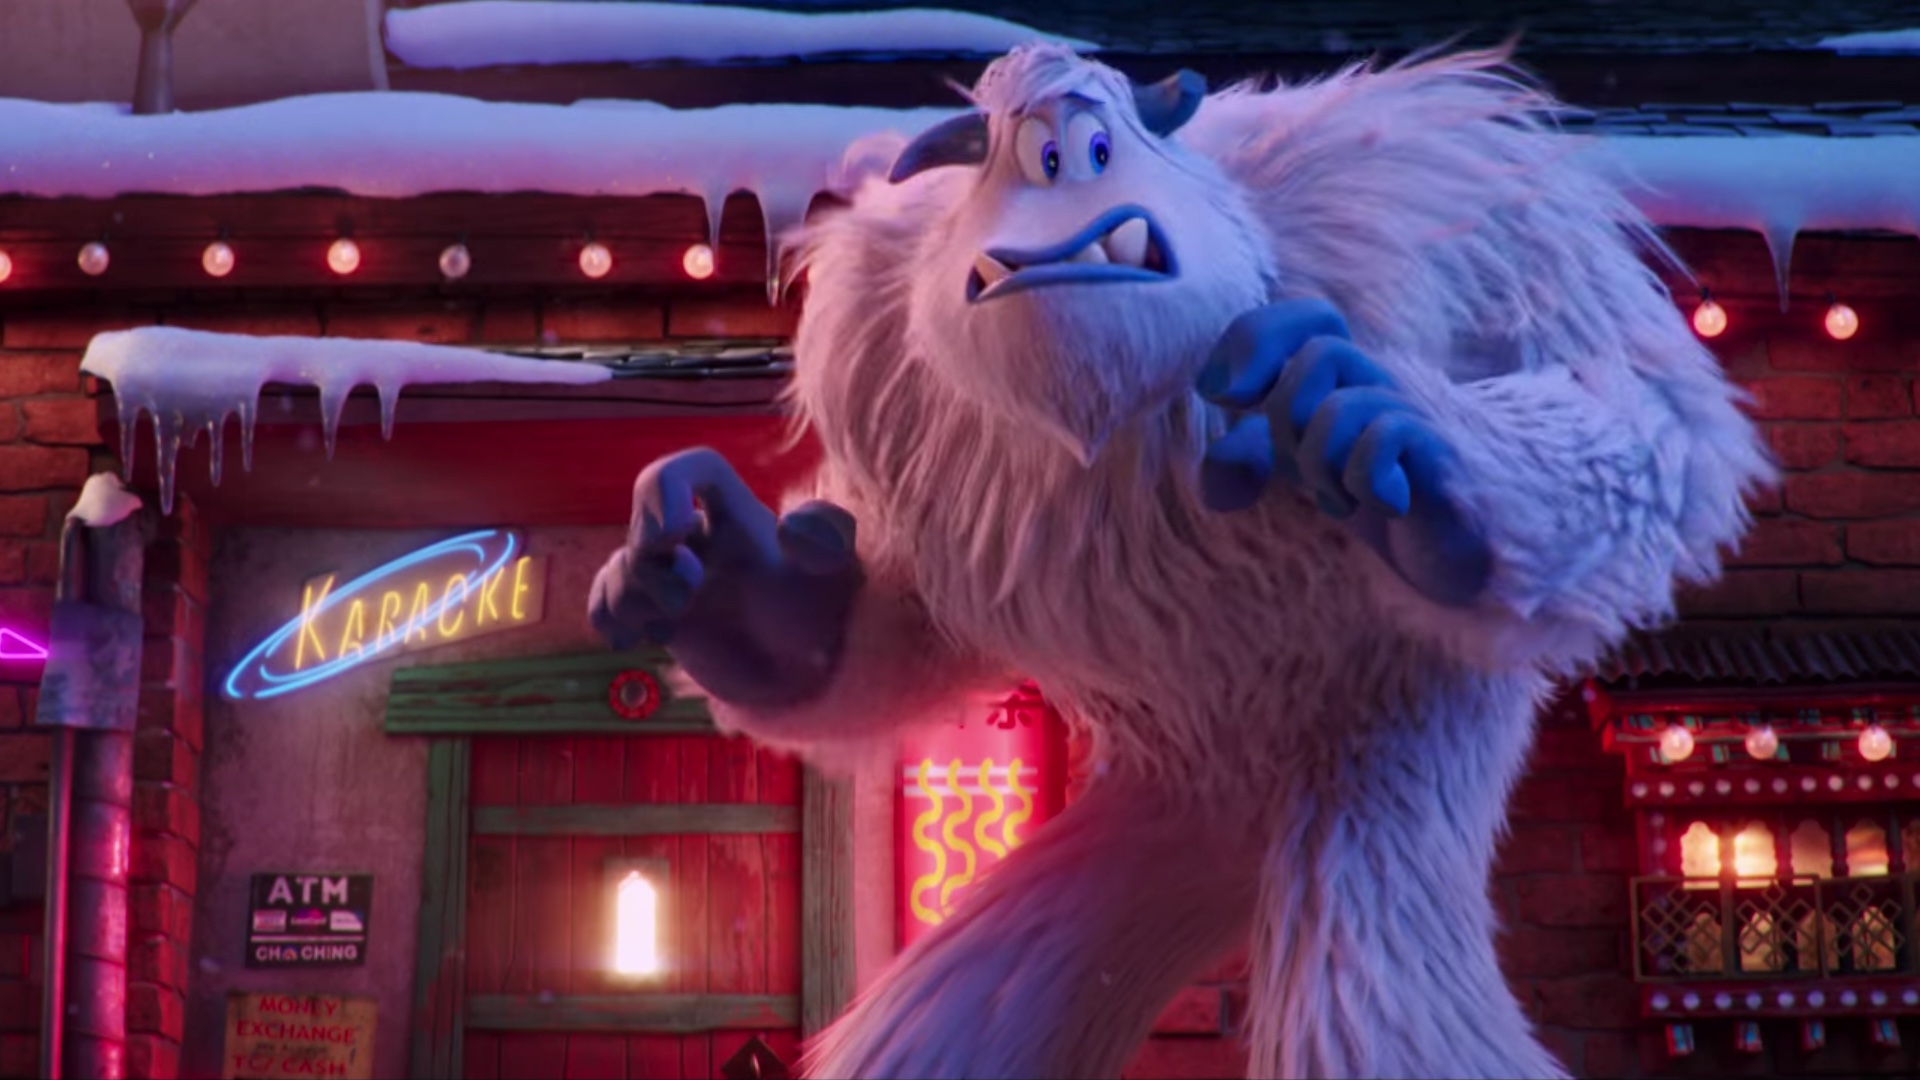 The Yeti Don't Believe Humans Exist in This Amusing Animated Adventure Film  SMALLFOOT — GeekTyrant